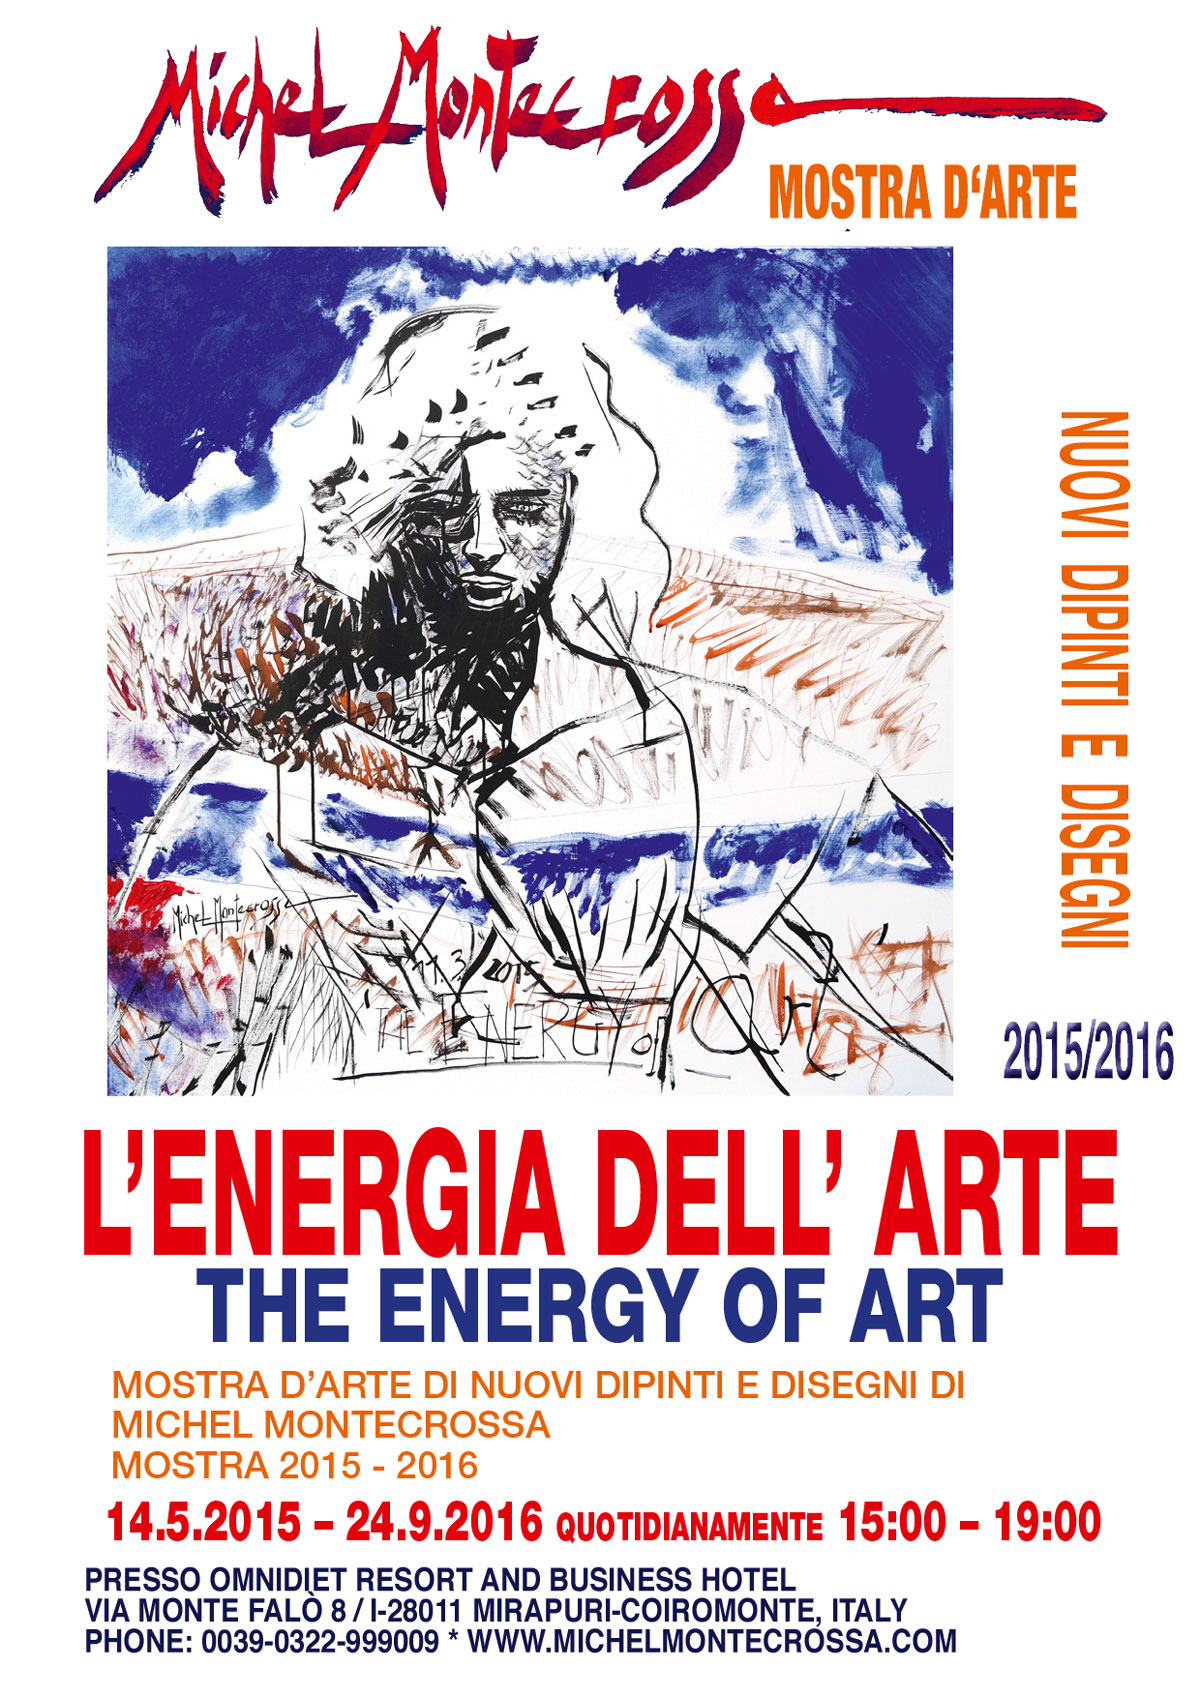 THE ENERGY OF ART Exhibition